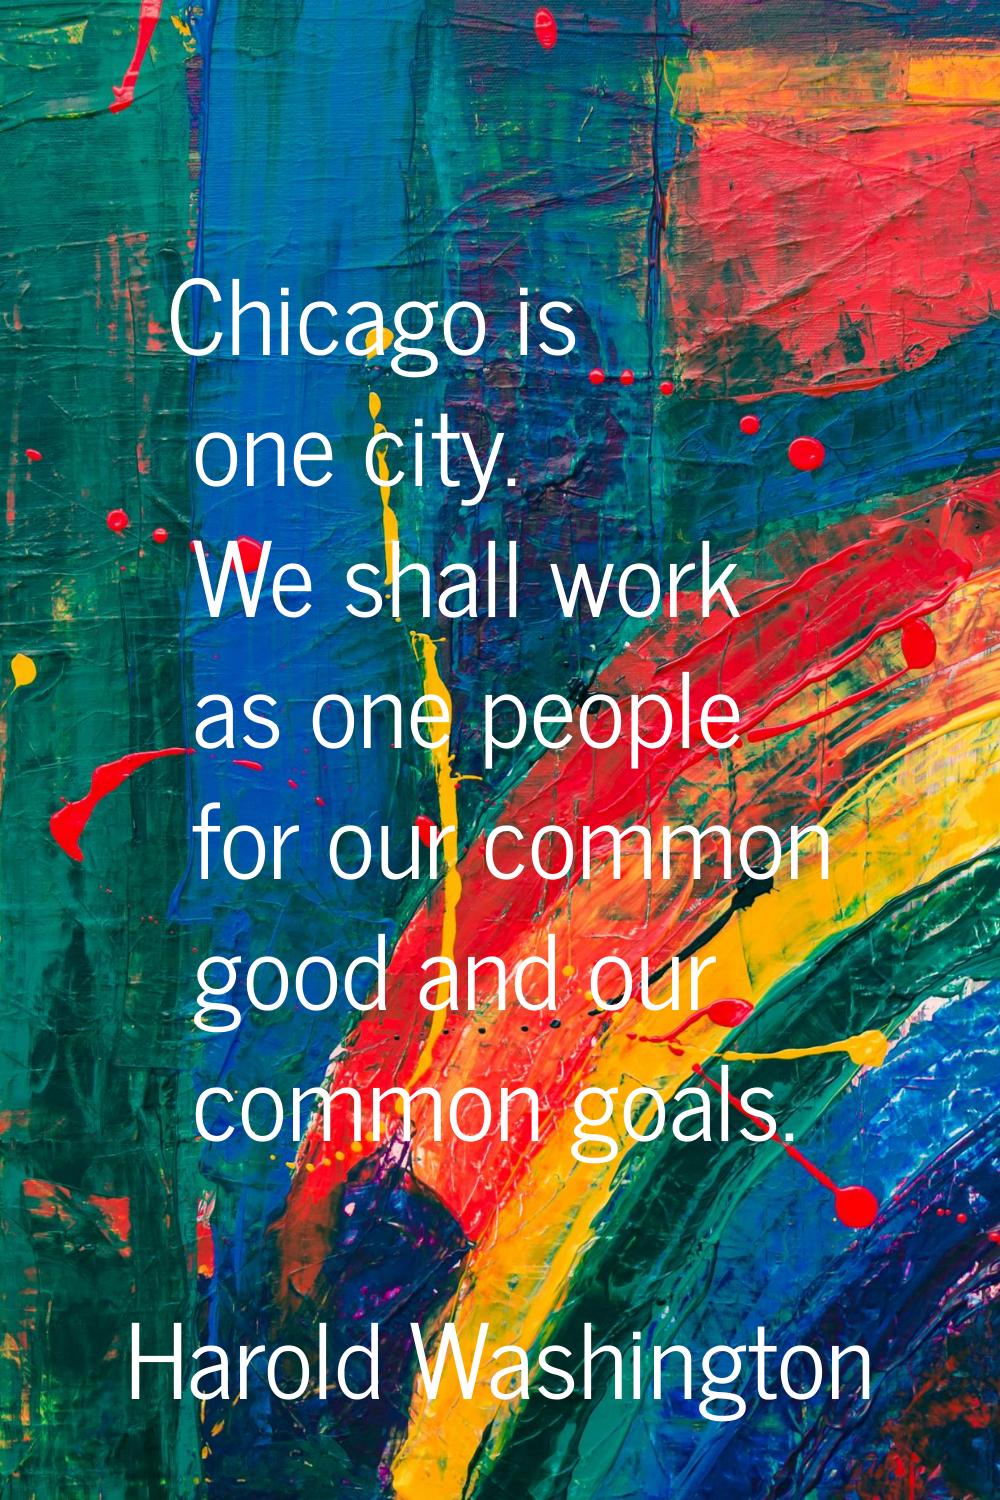 Chicago is one city. We shall work as one people for our common good and our common goals.